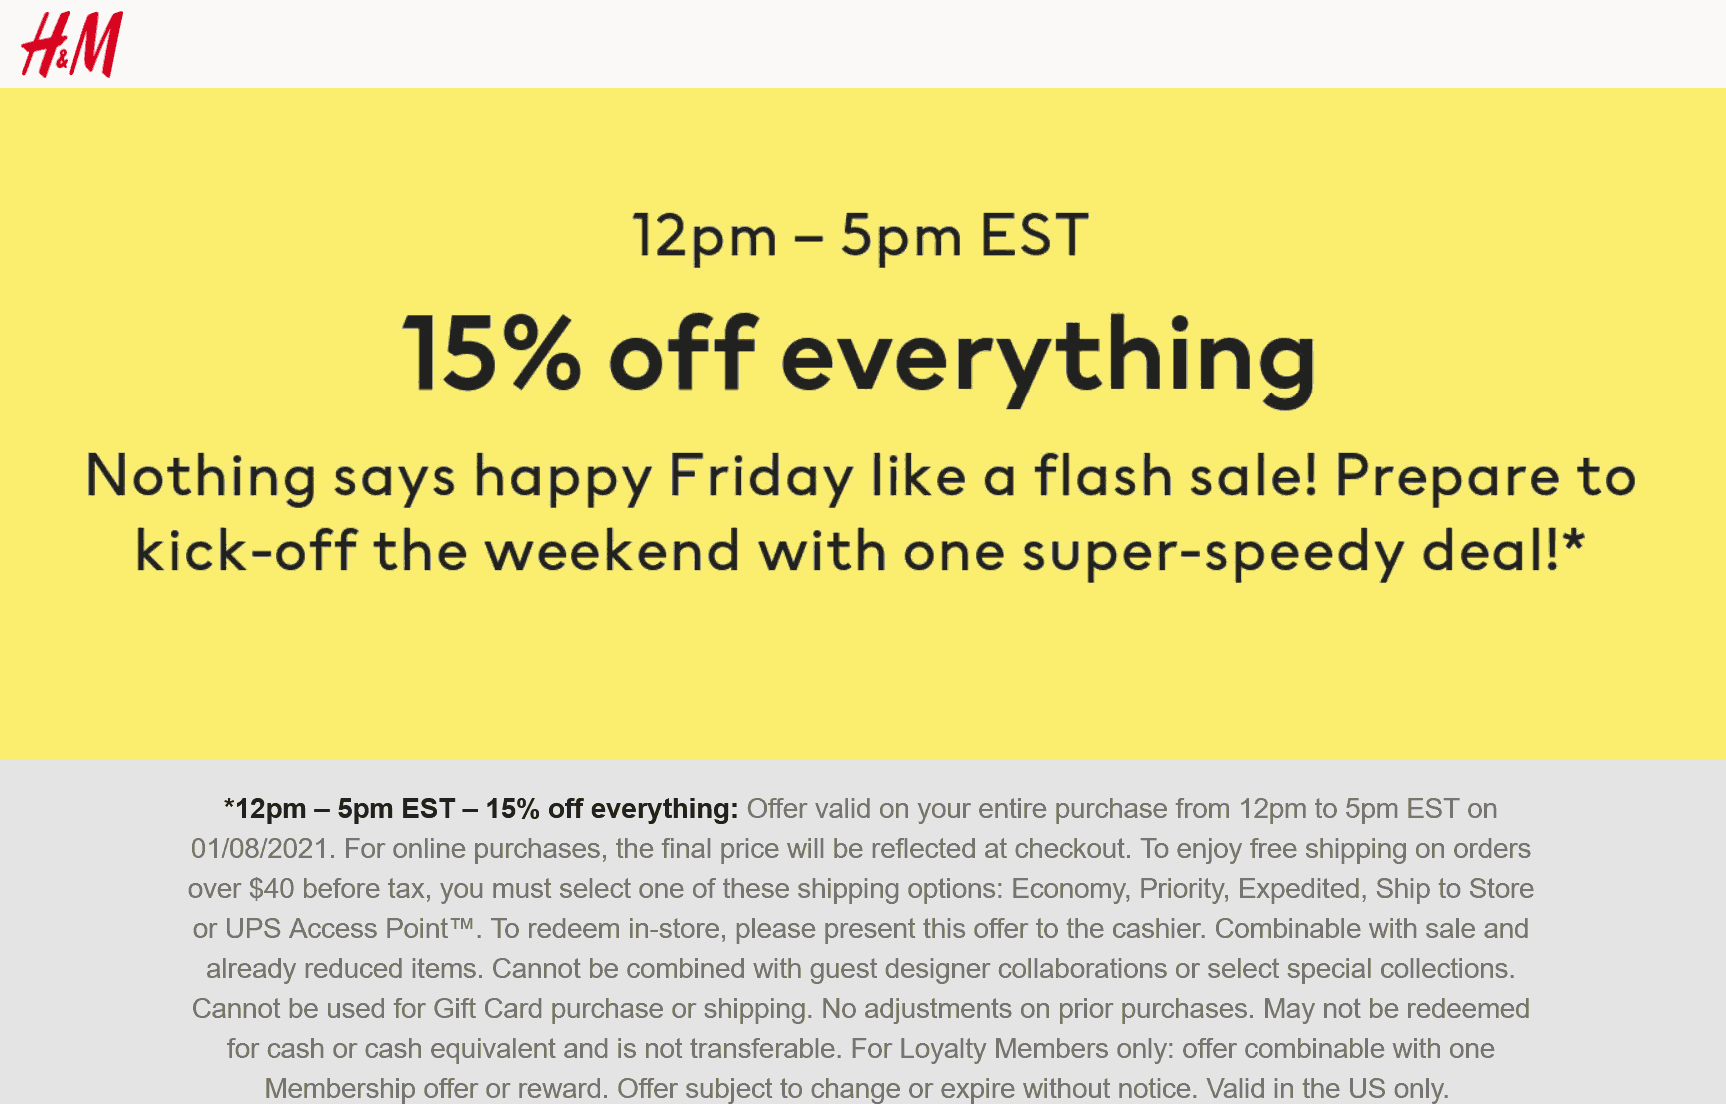 H&M stores Coupon  15% off everything til 5pm today at H&M, ditto online #hm 